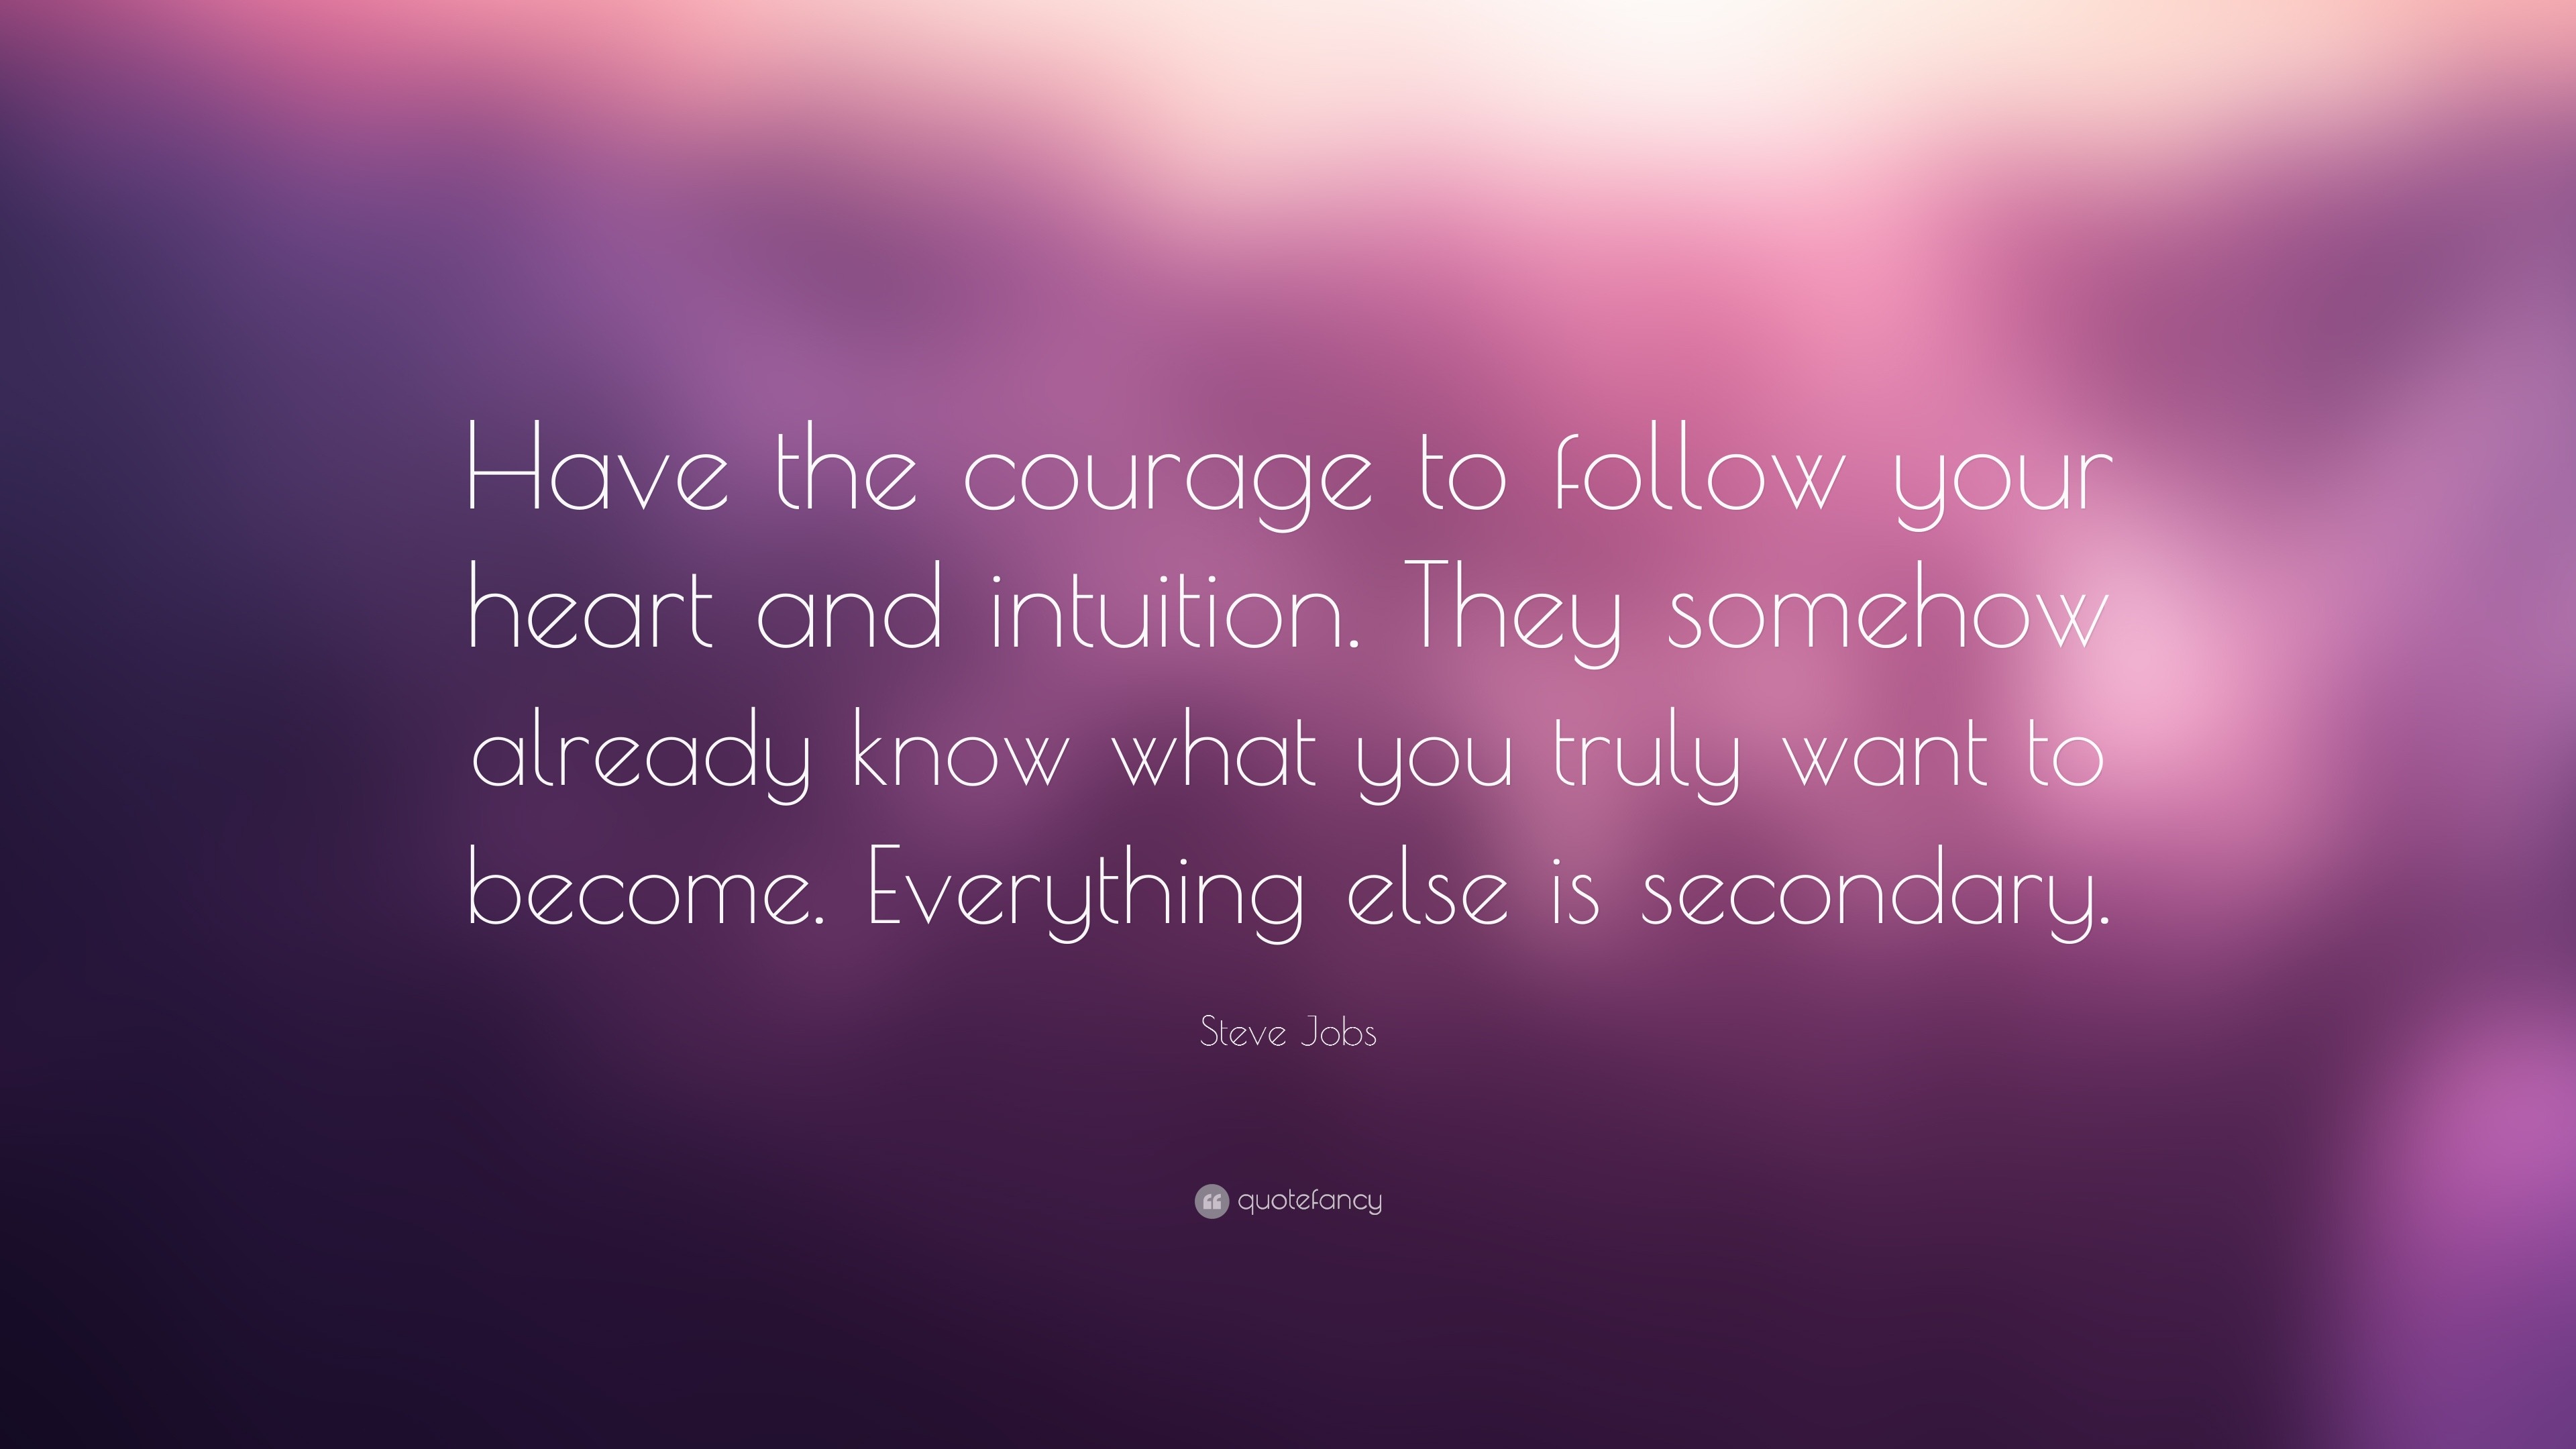 Steve Jobs Quote: “Have the courage to follow your heart and intuition